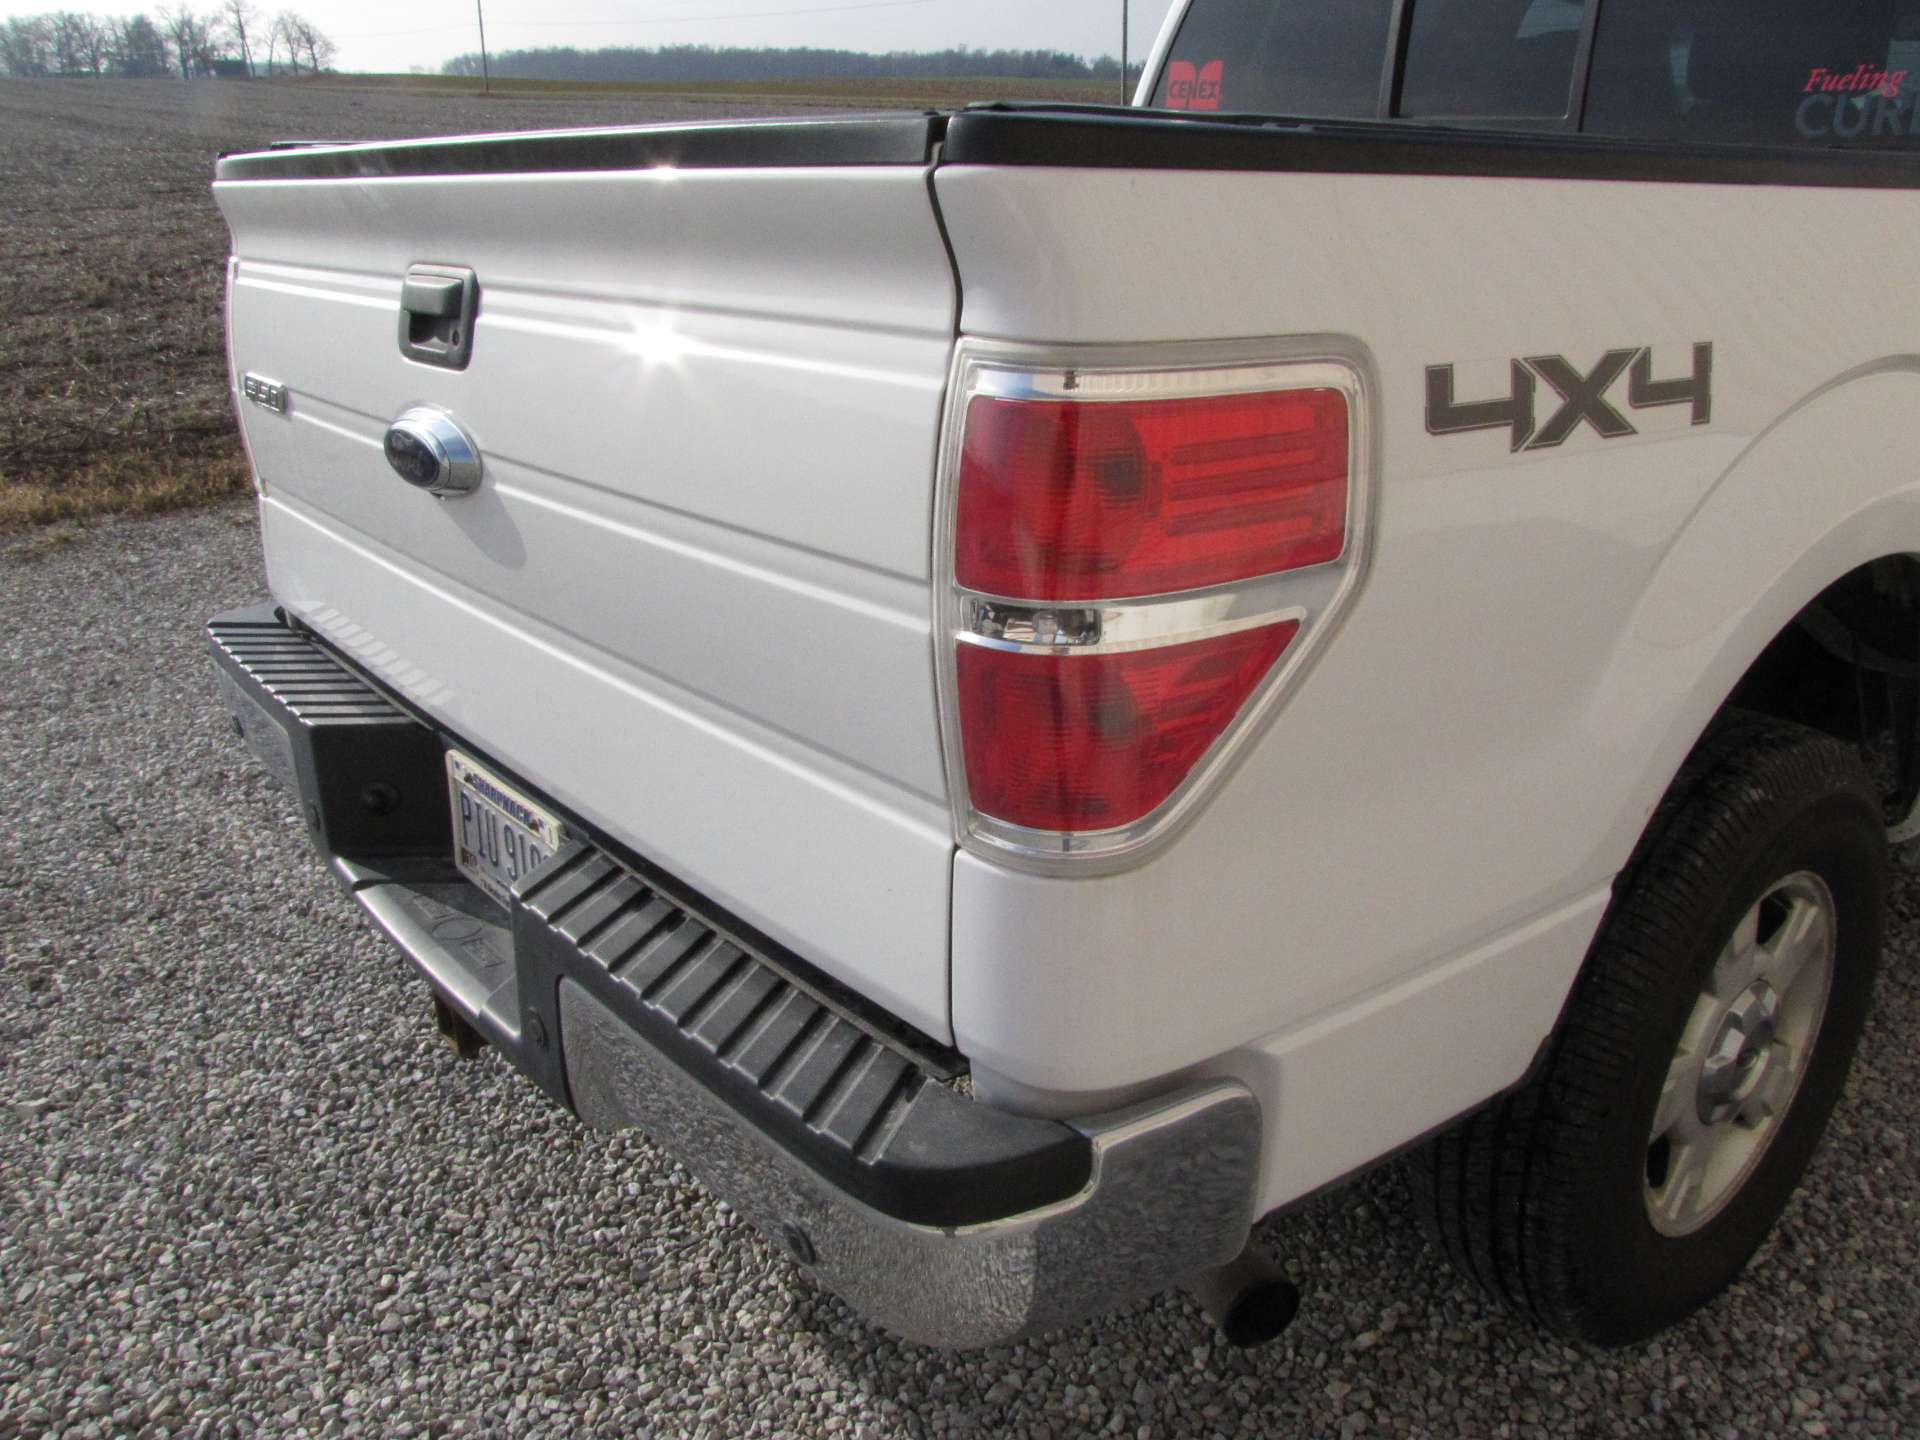 2014 Ford F-150 XLT pickup truck - Image 34 of 68